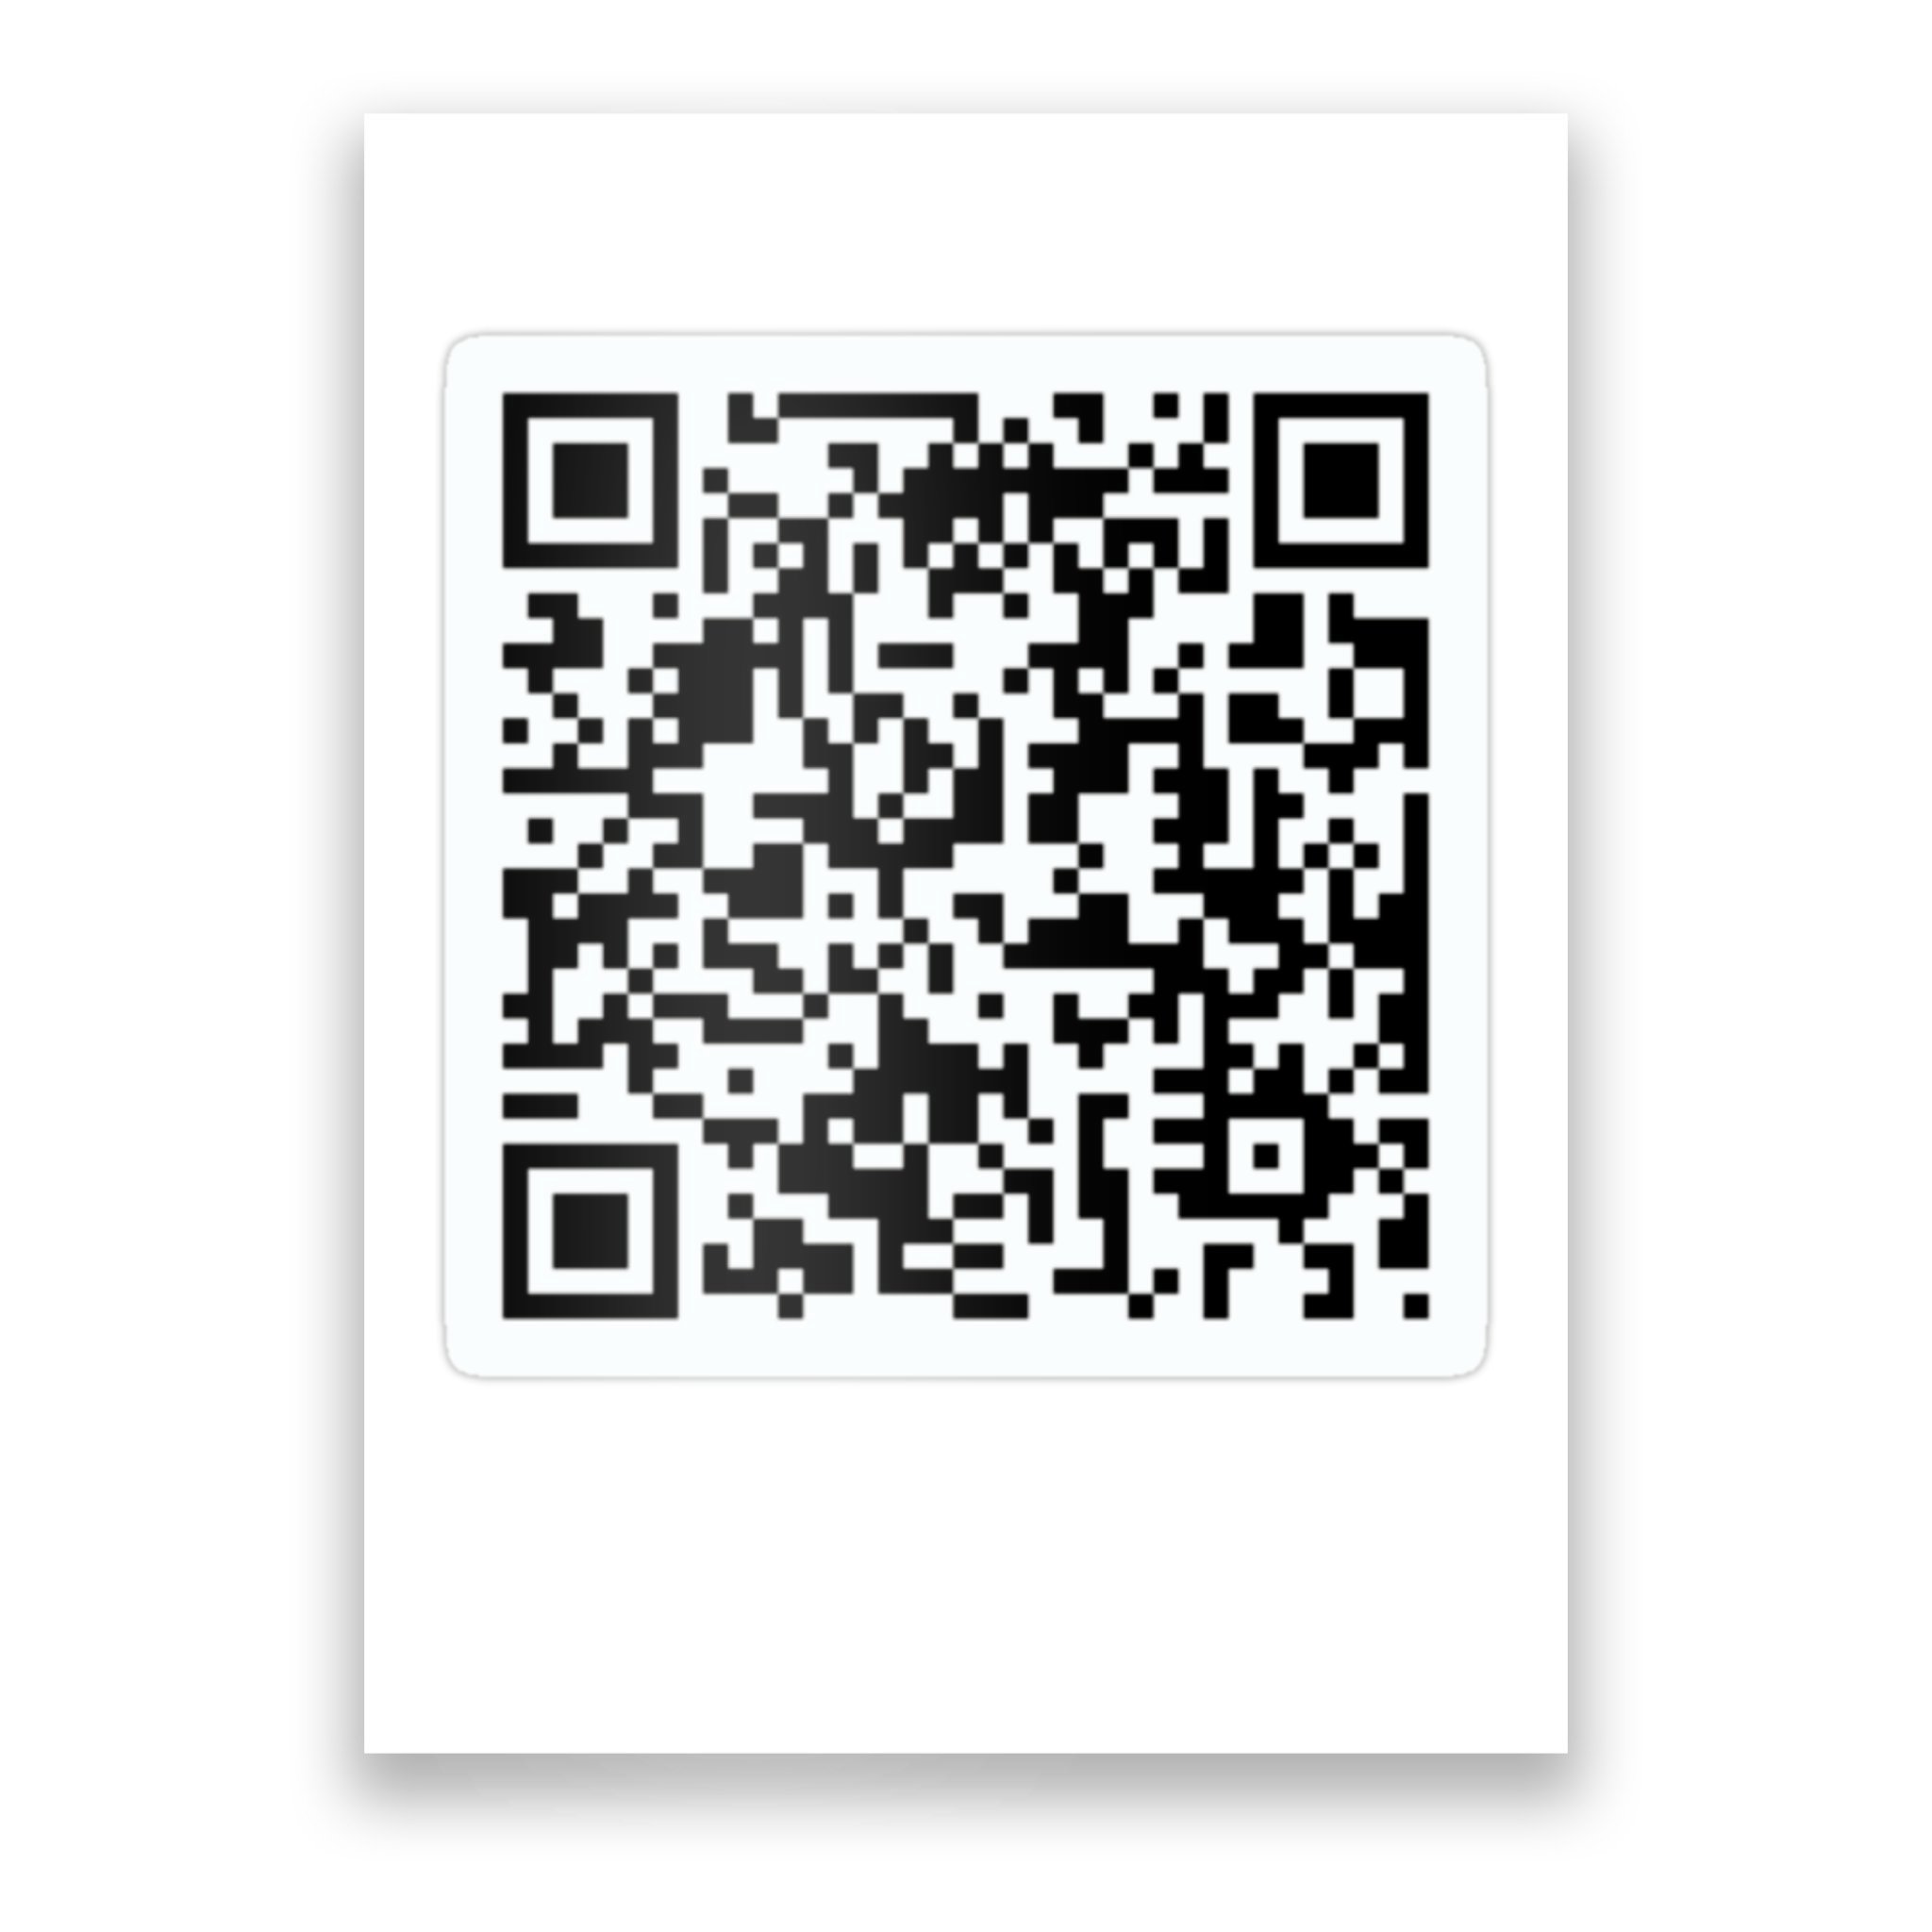 Here is the Rick roll qr code, do as you please. - 9GAG